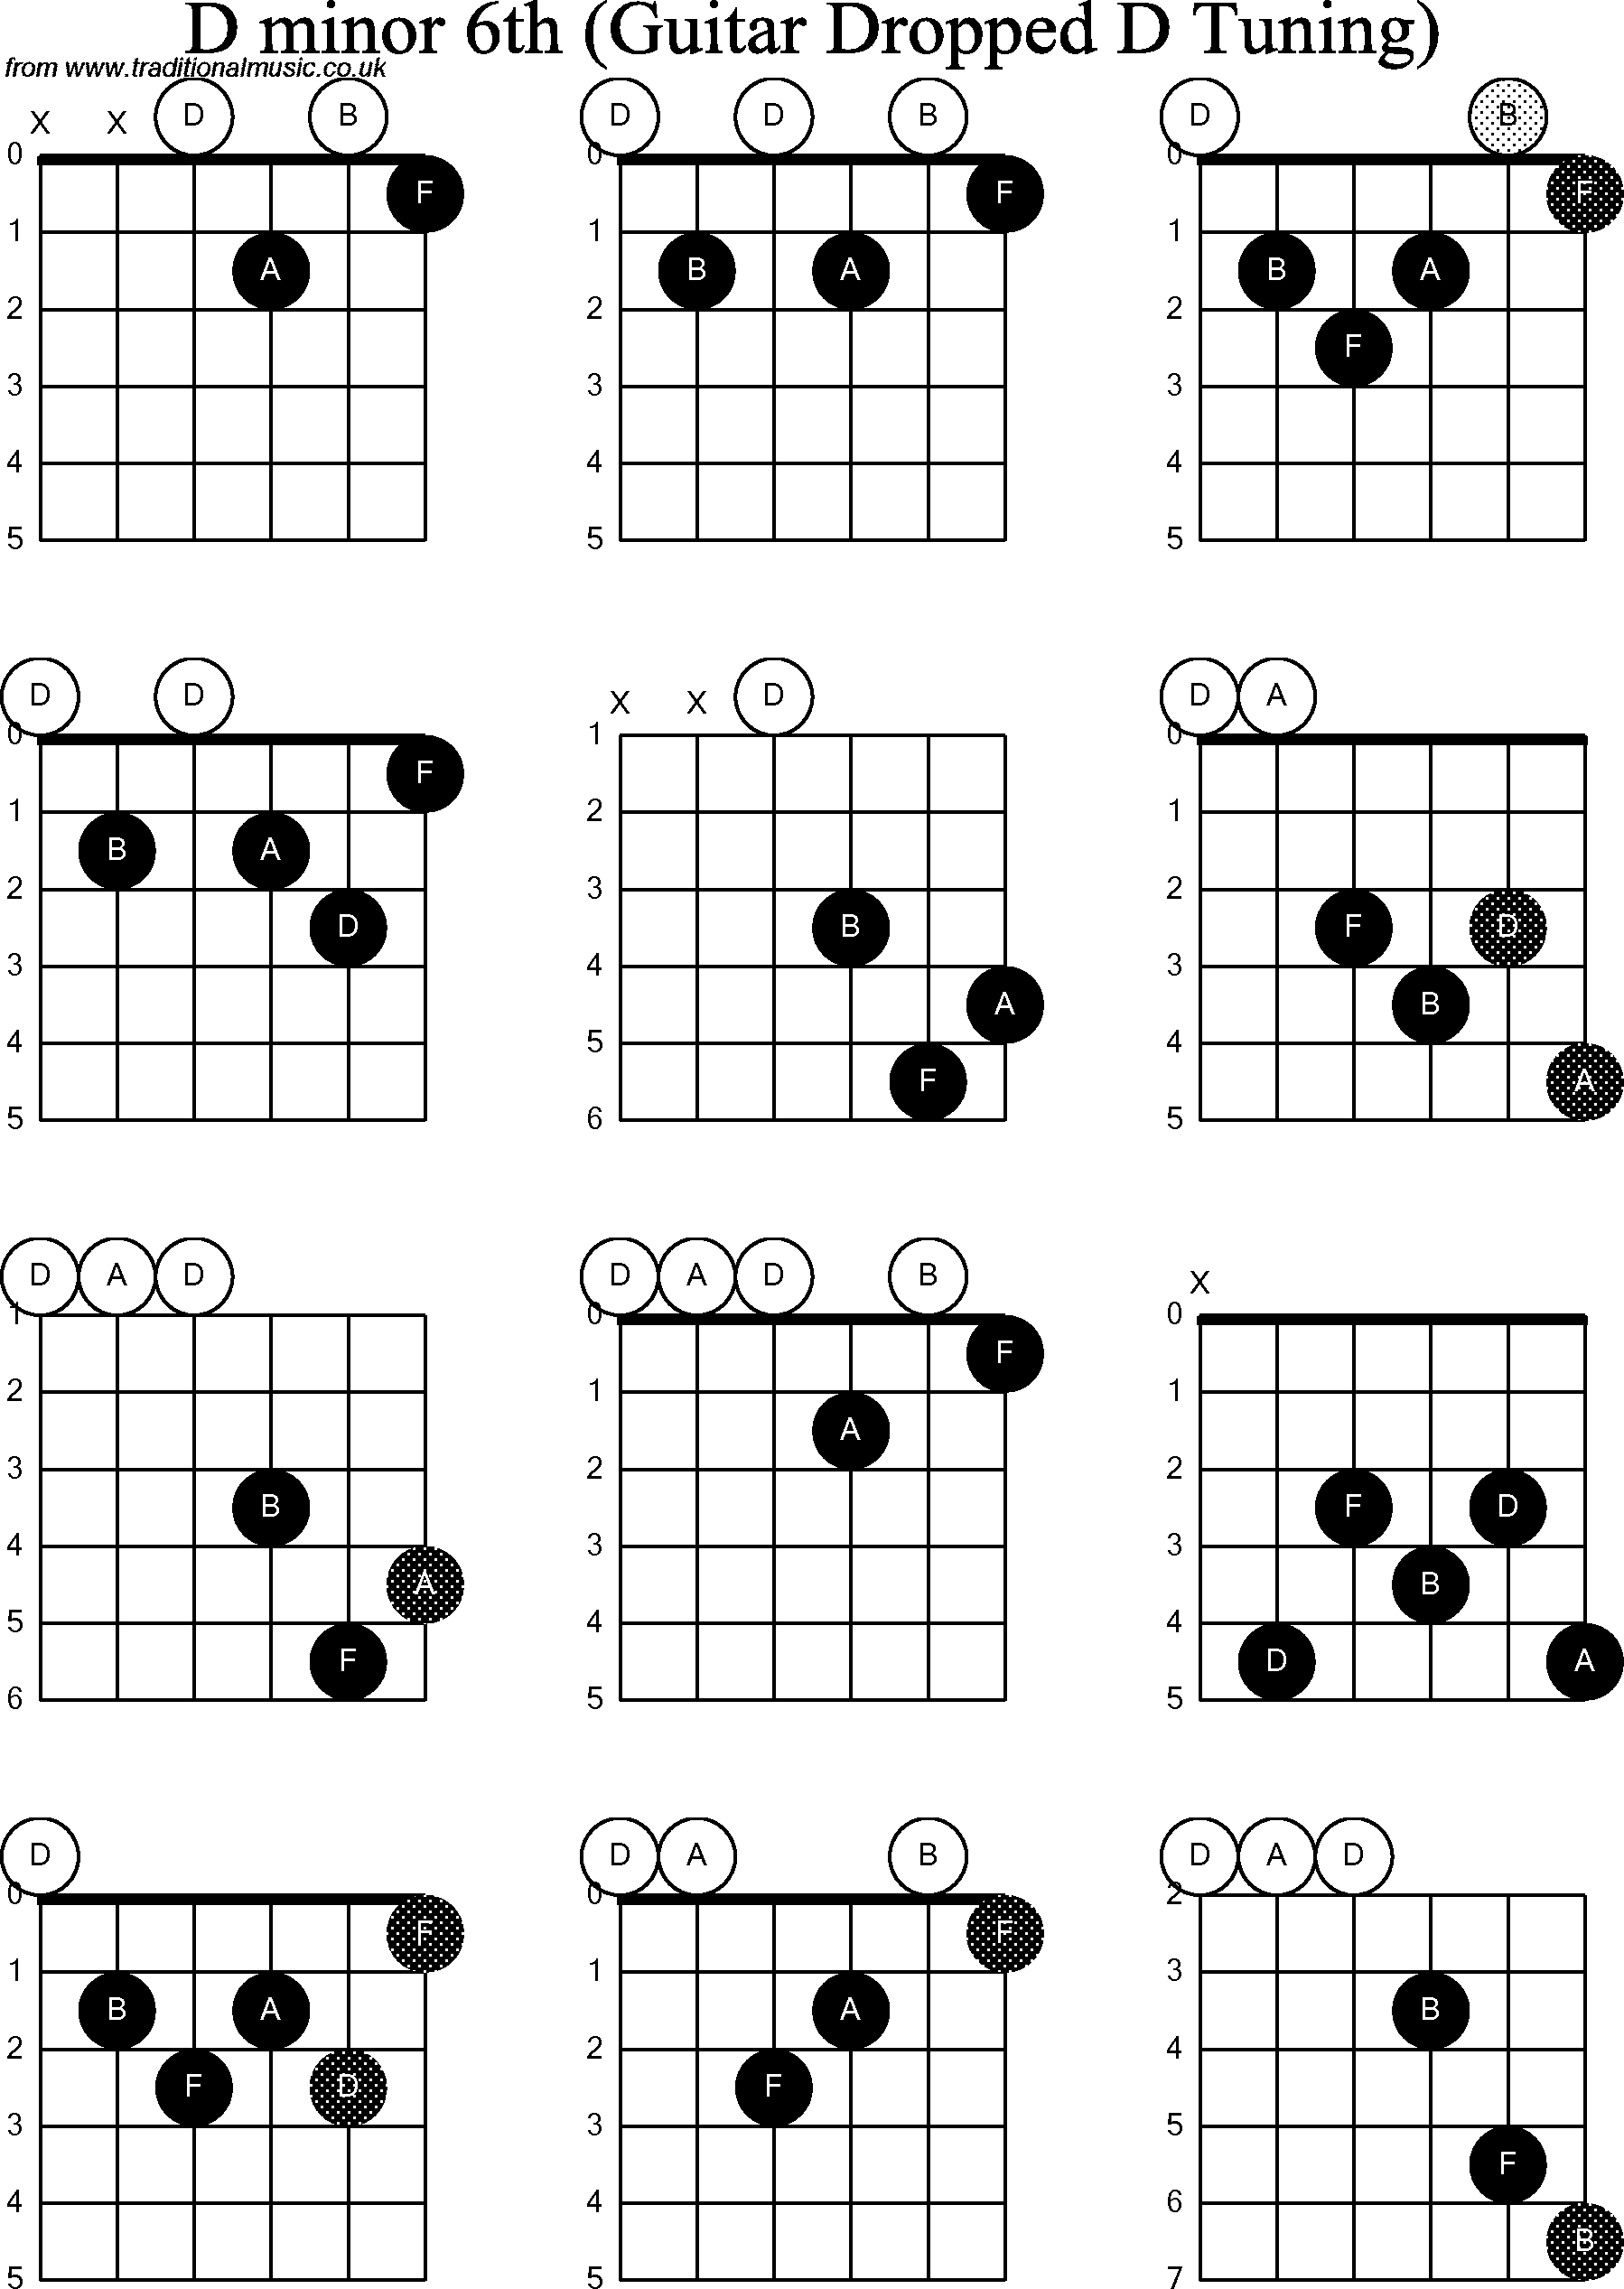 Chord diagrams for dropped D Guitar(DADGBE), D Minor6th